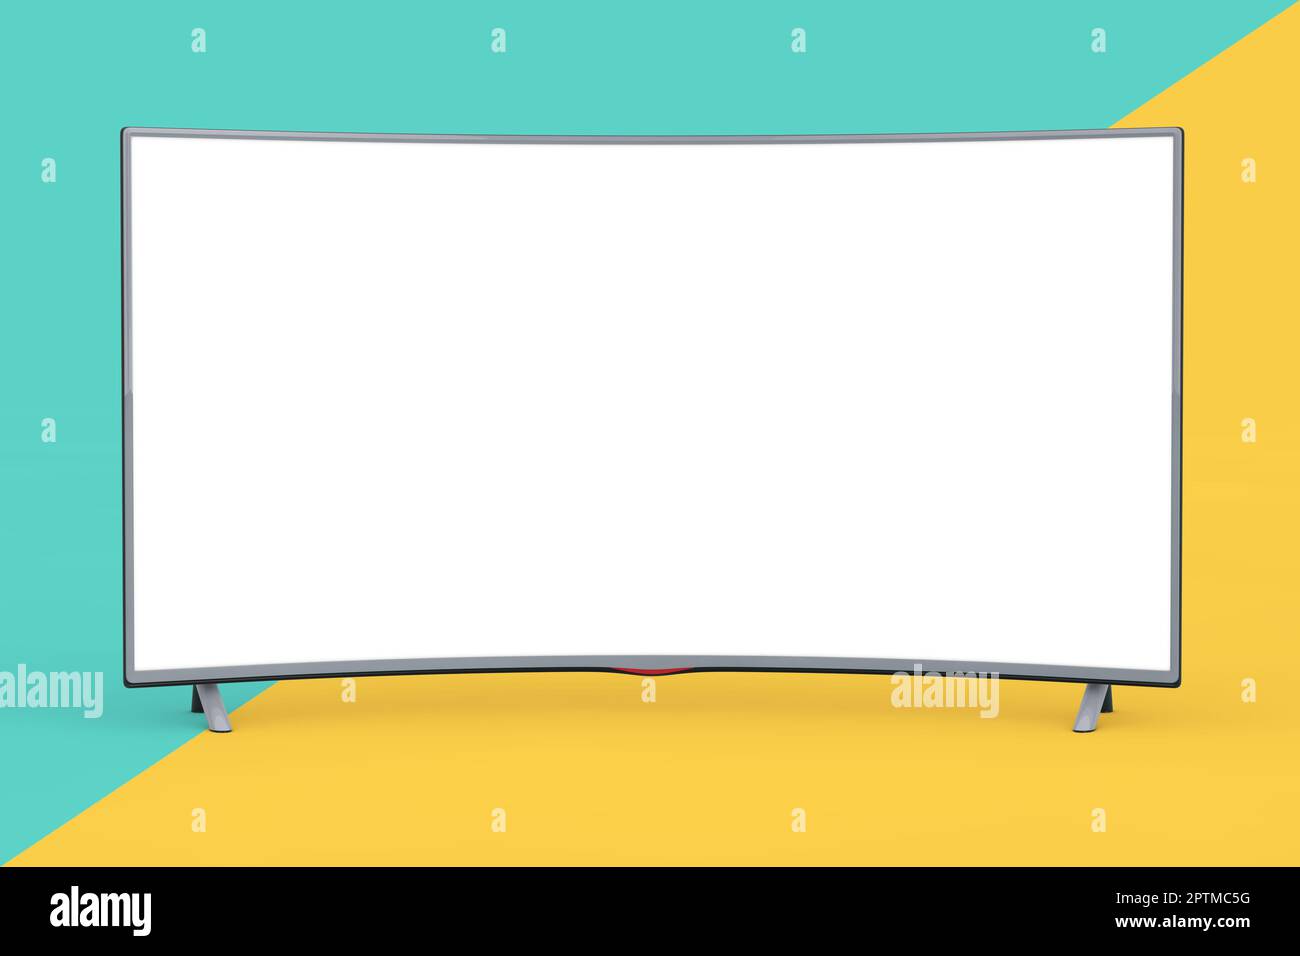 Modern Curved Led or LCD TV with Blank Screen for Your Design on a yellow and blue background. 3d Rendering Stock Photo